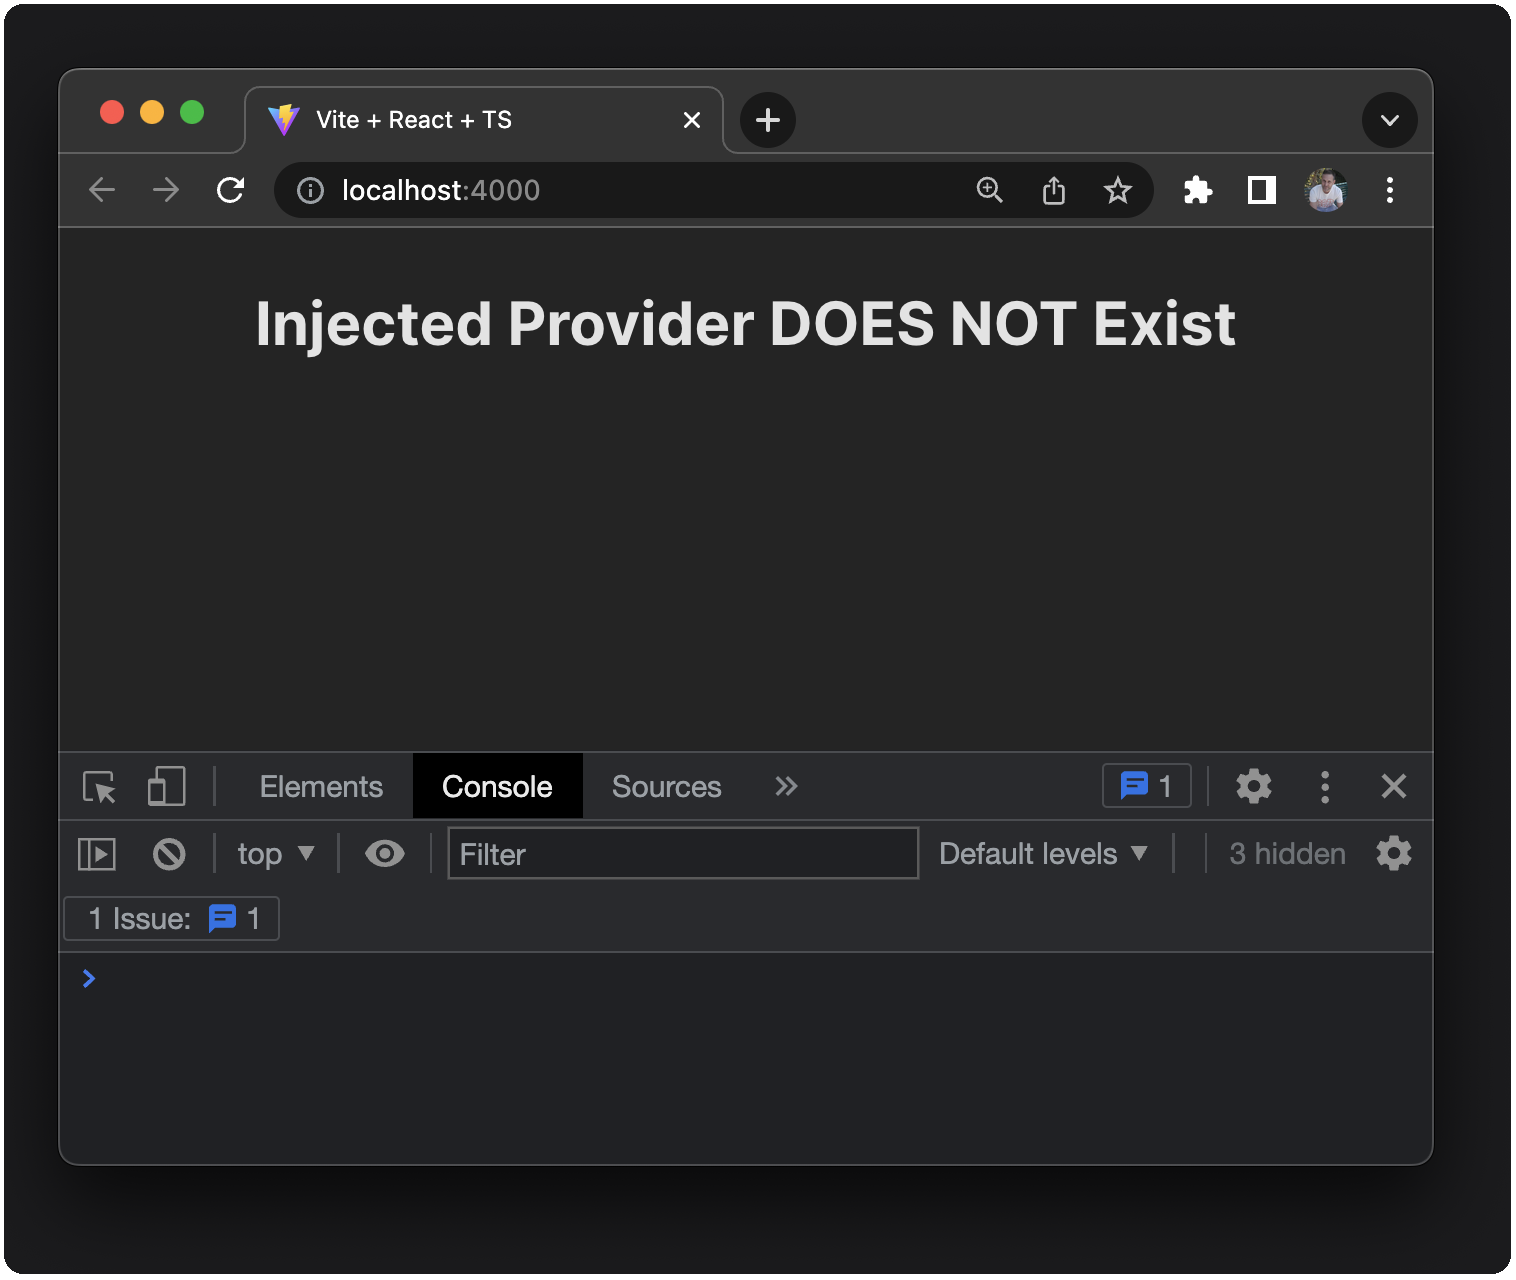 Injected Provider DOES NOT Exist